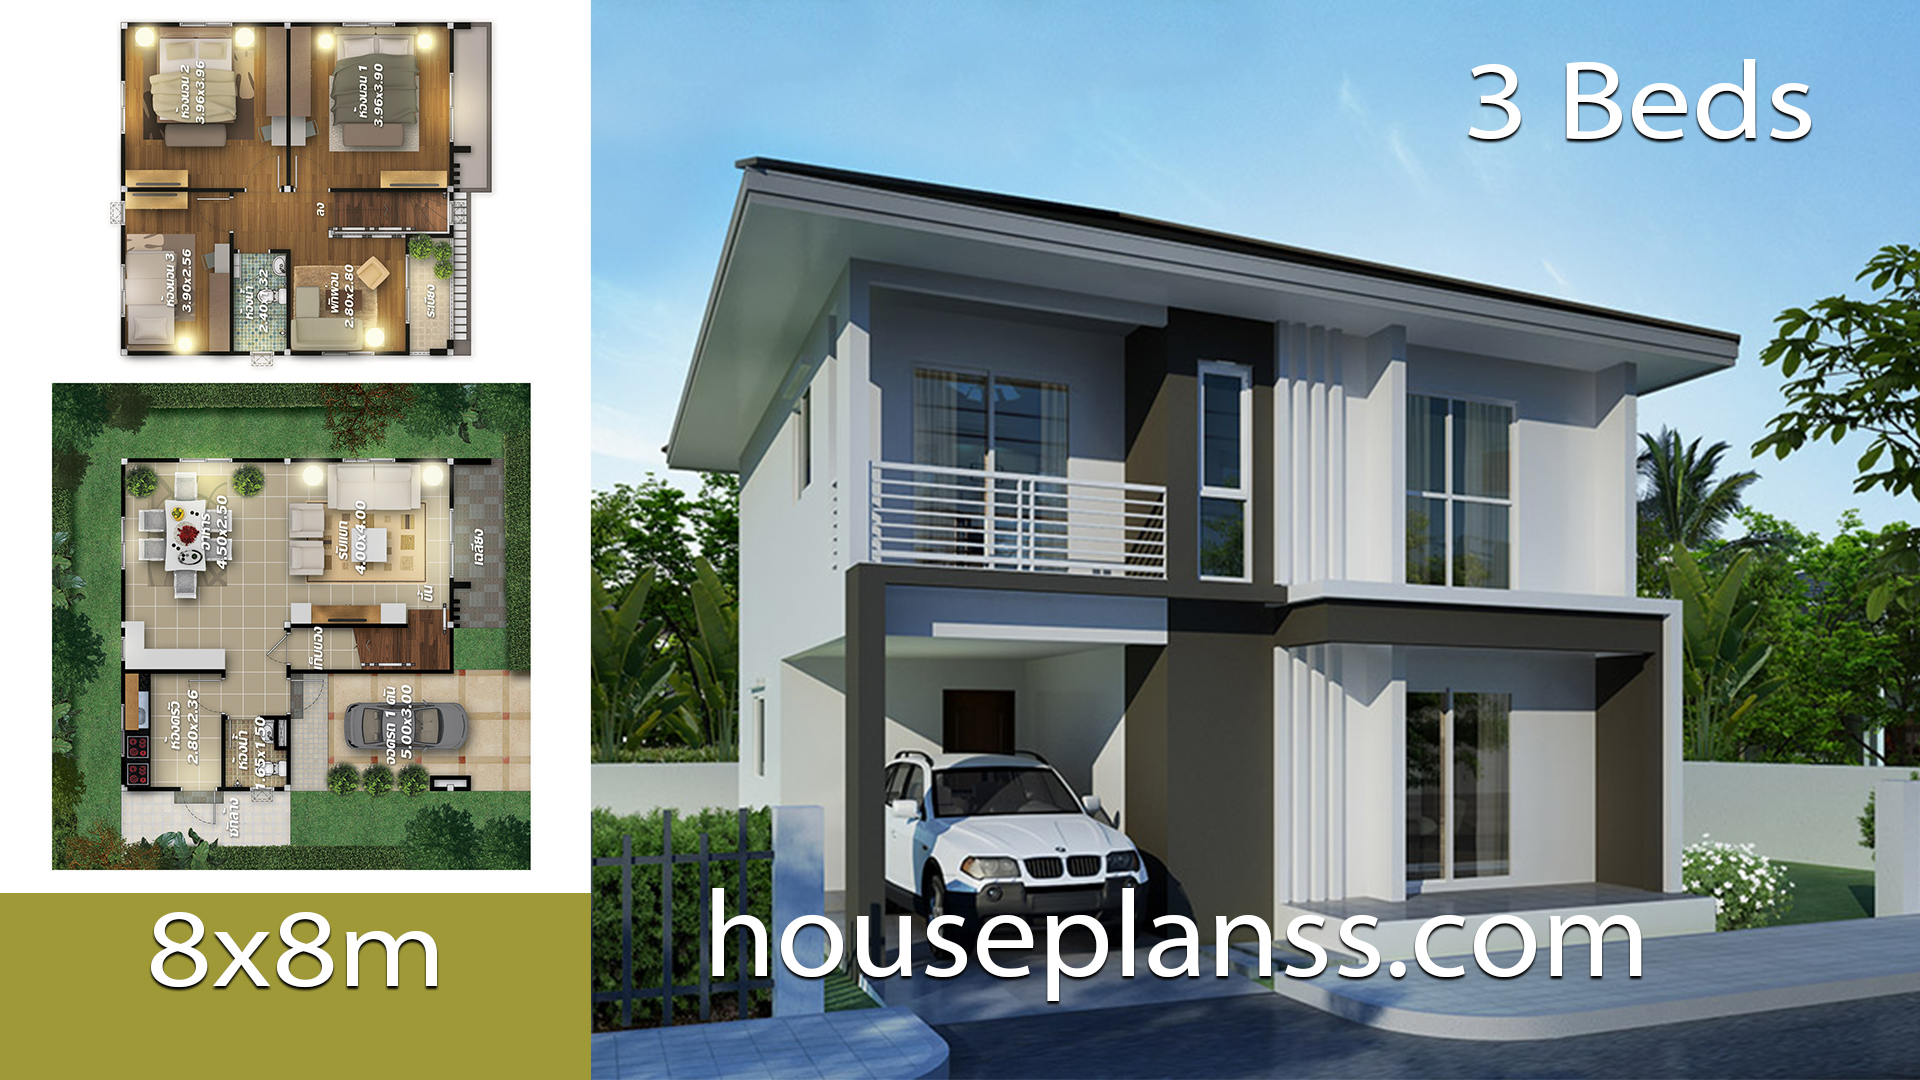 House plans design idea 8×8 with 3 Bedrooms